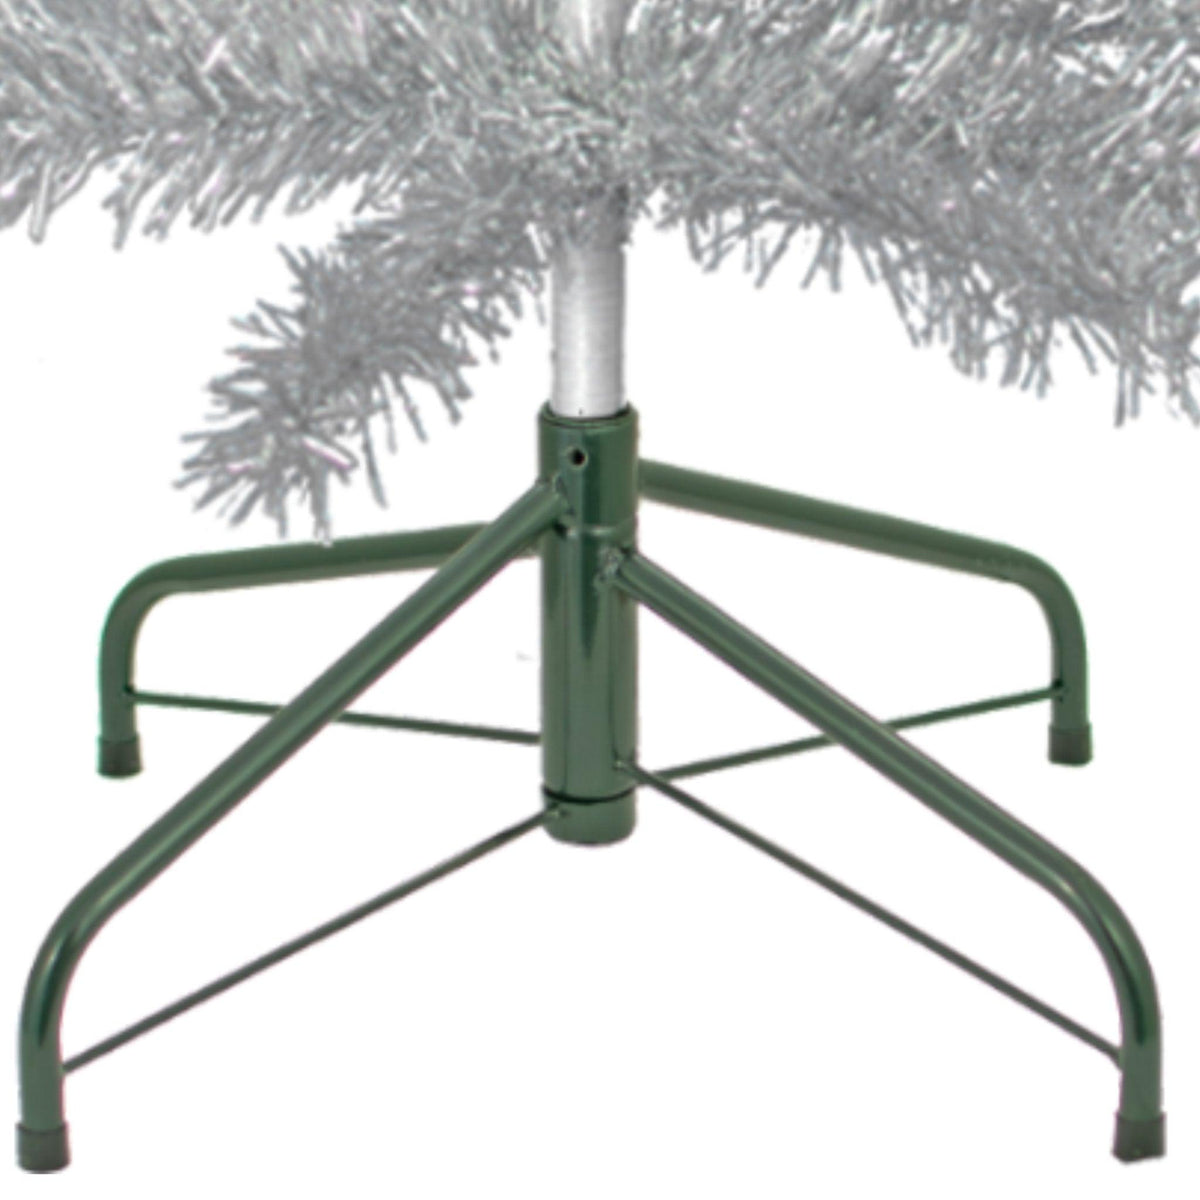 5FT Tall Silver Christmas Trees come in 2 pieces with a green metal base